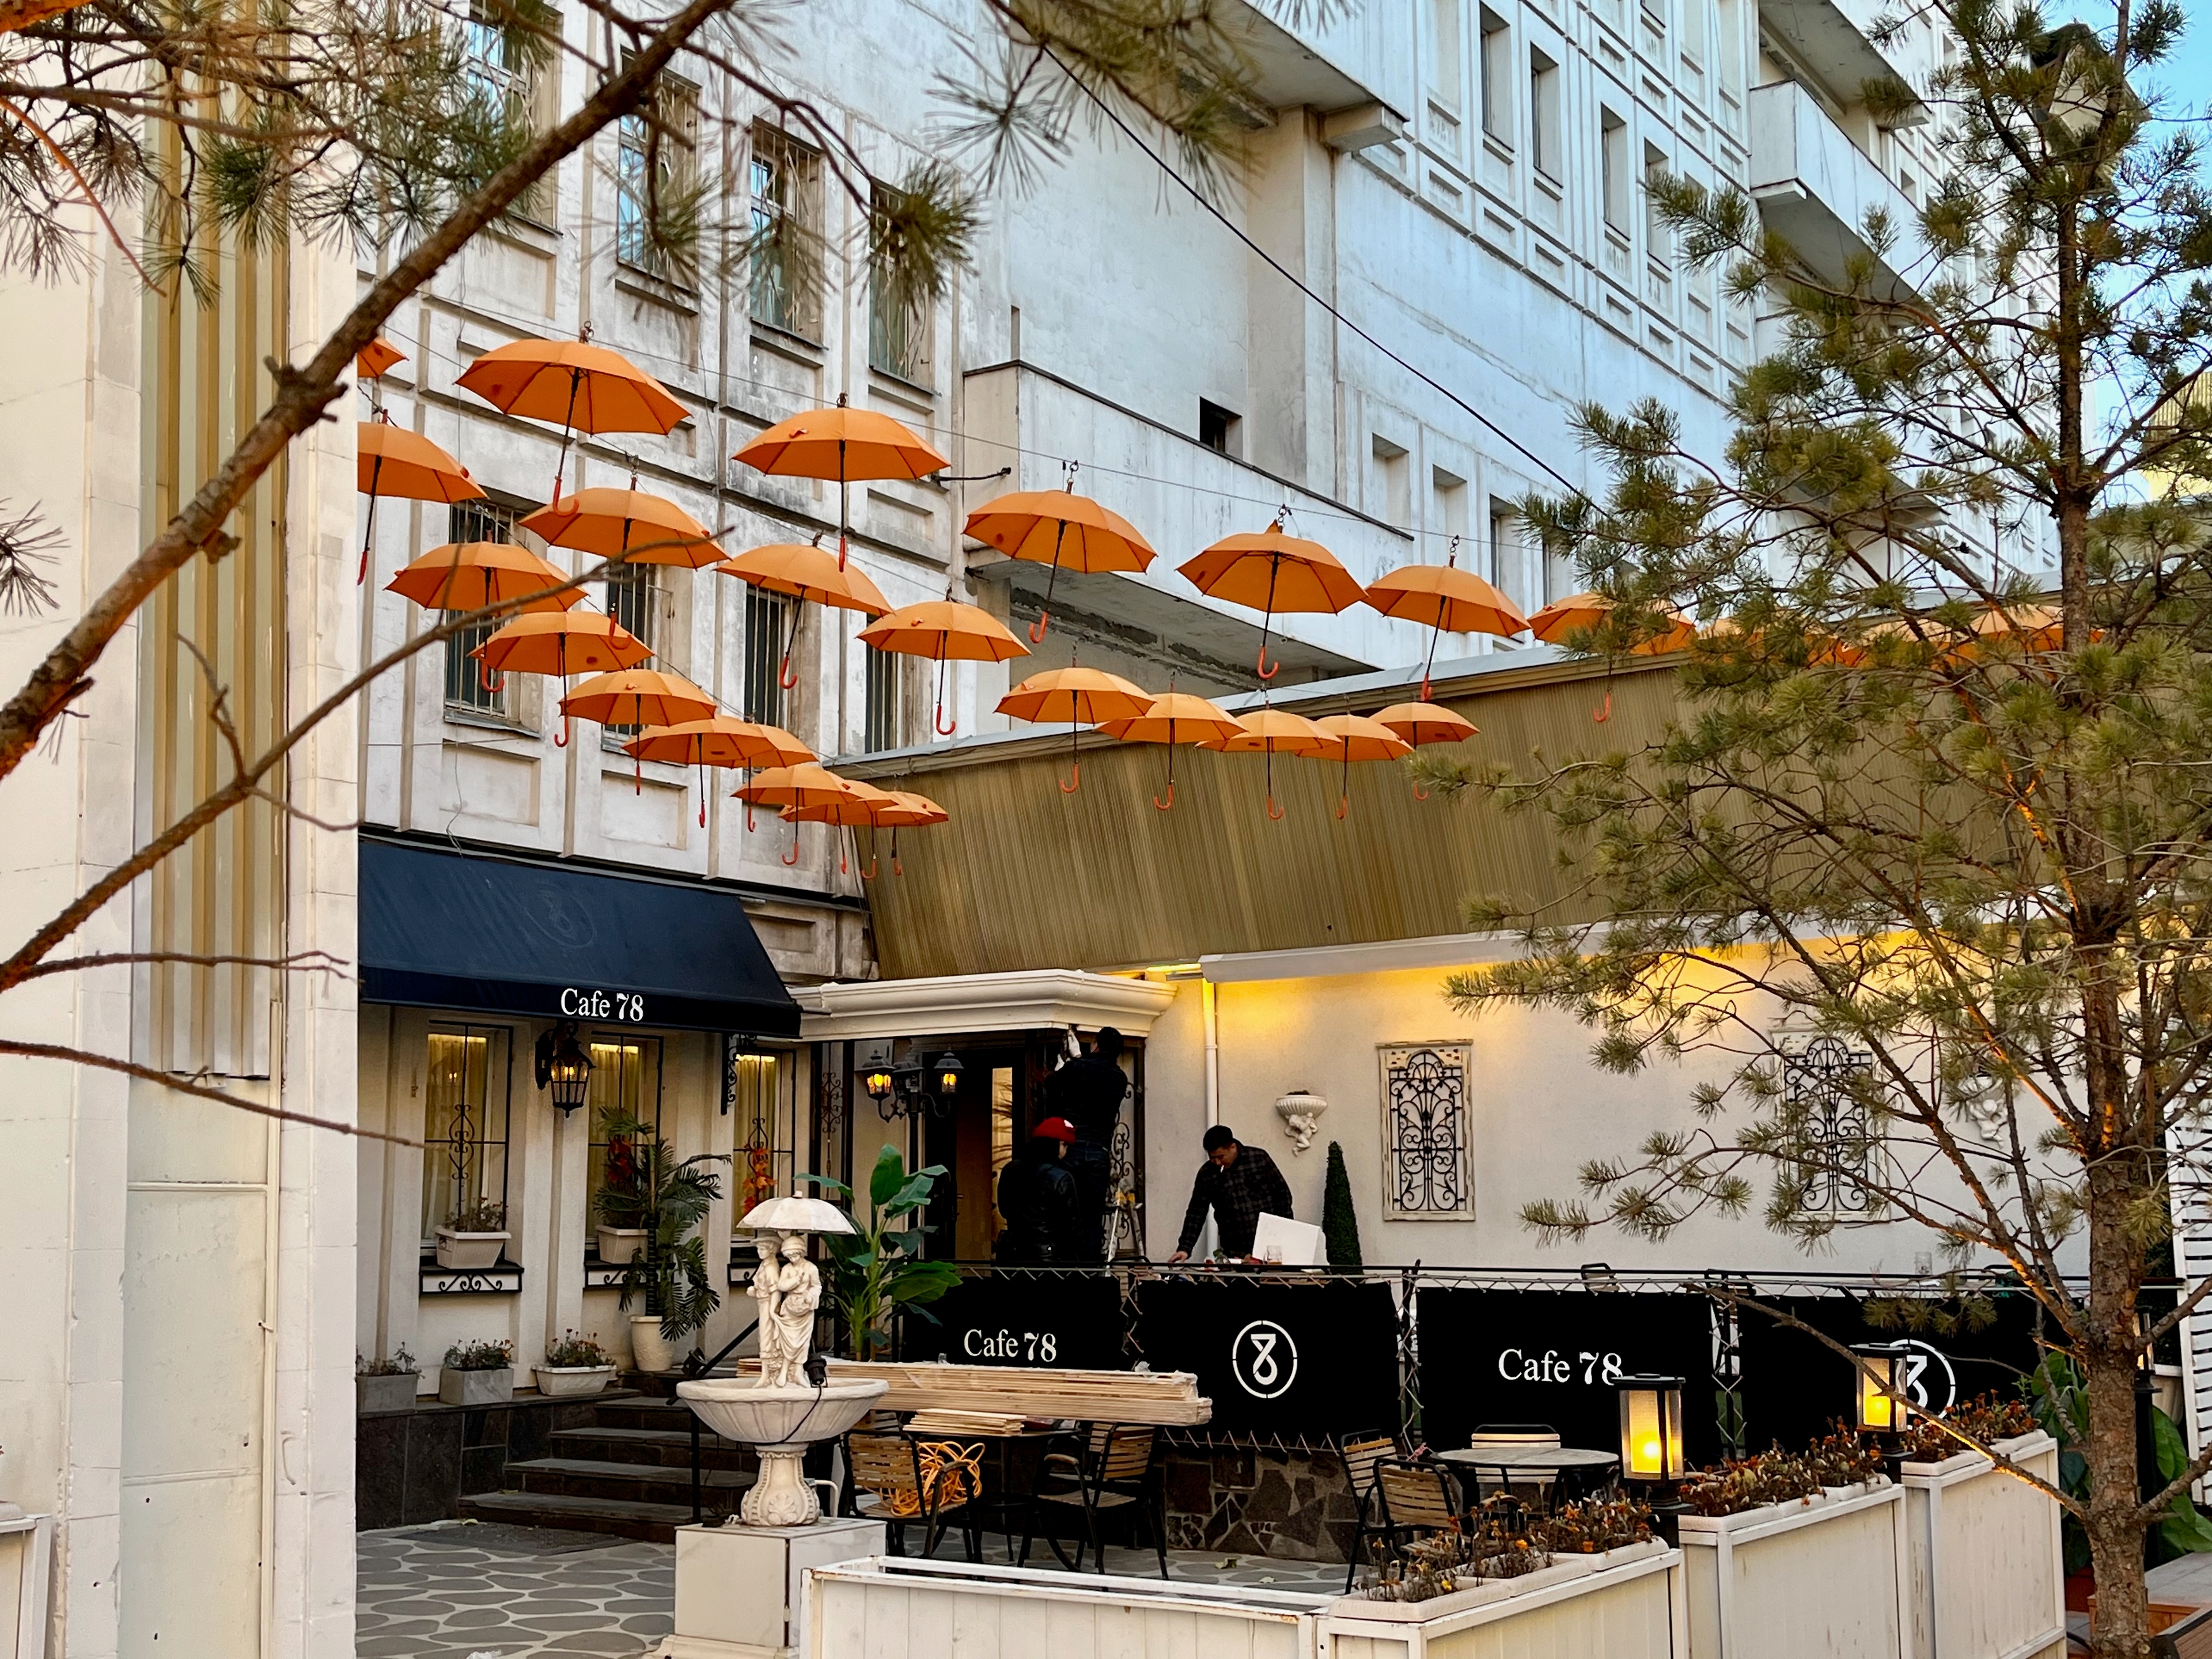 A cafe with orange umbrella decorations cleaning up after hours.